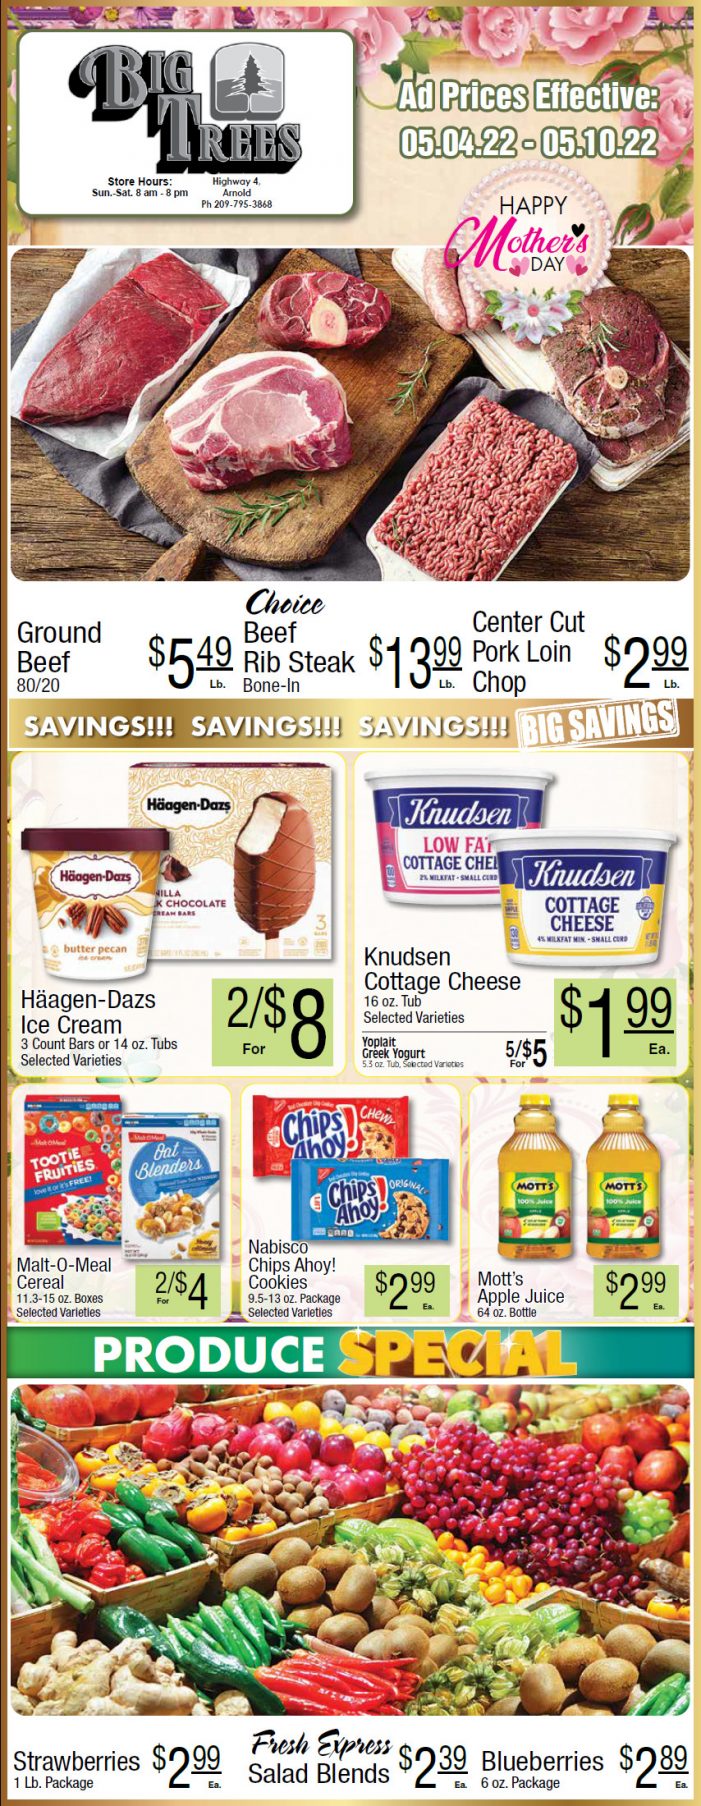 Big Trees Market Weekly Ad & Grocery Specials May 4th Through May 10th! Shop Local & Save!